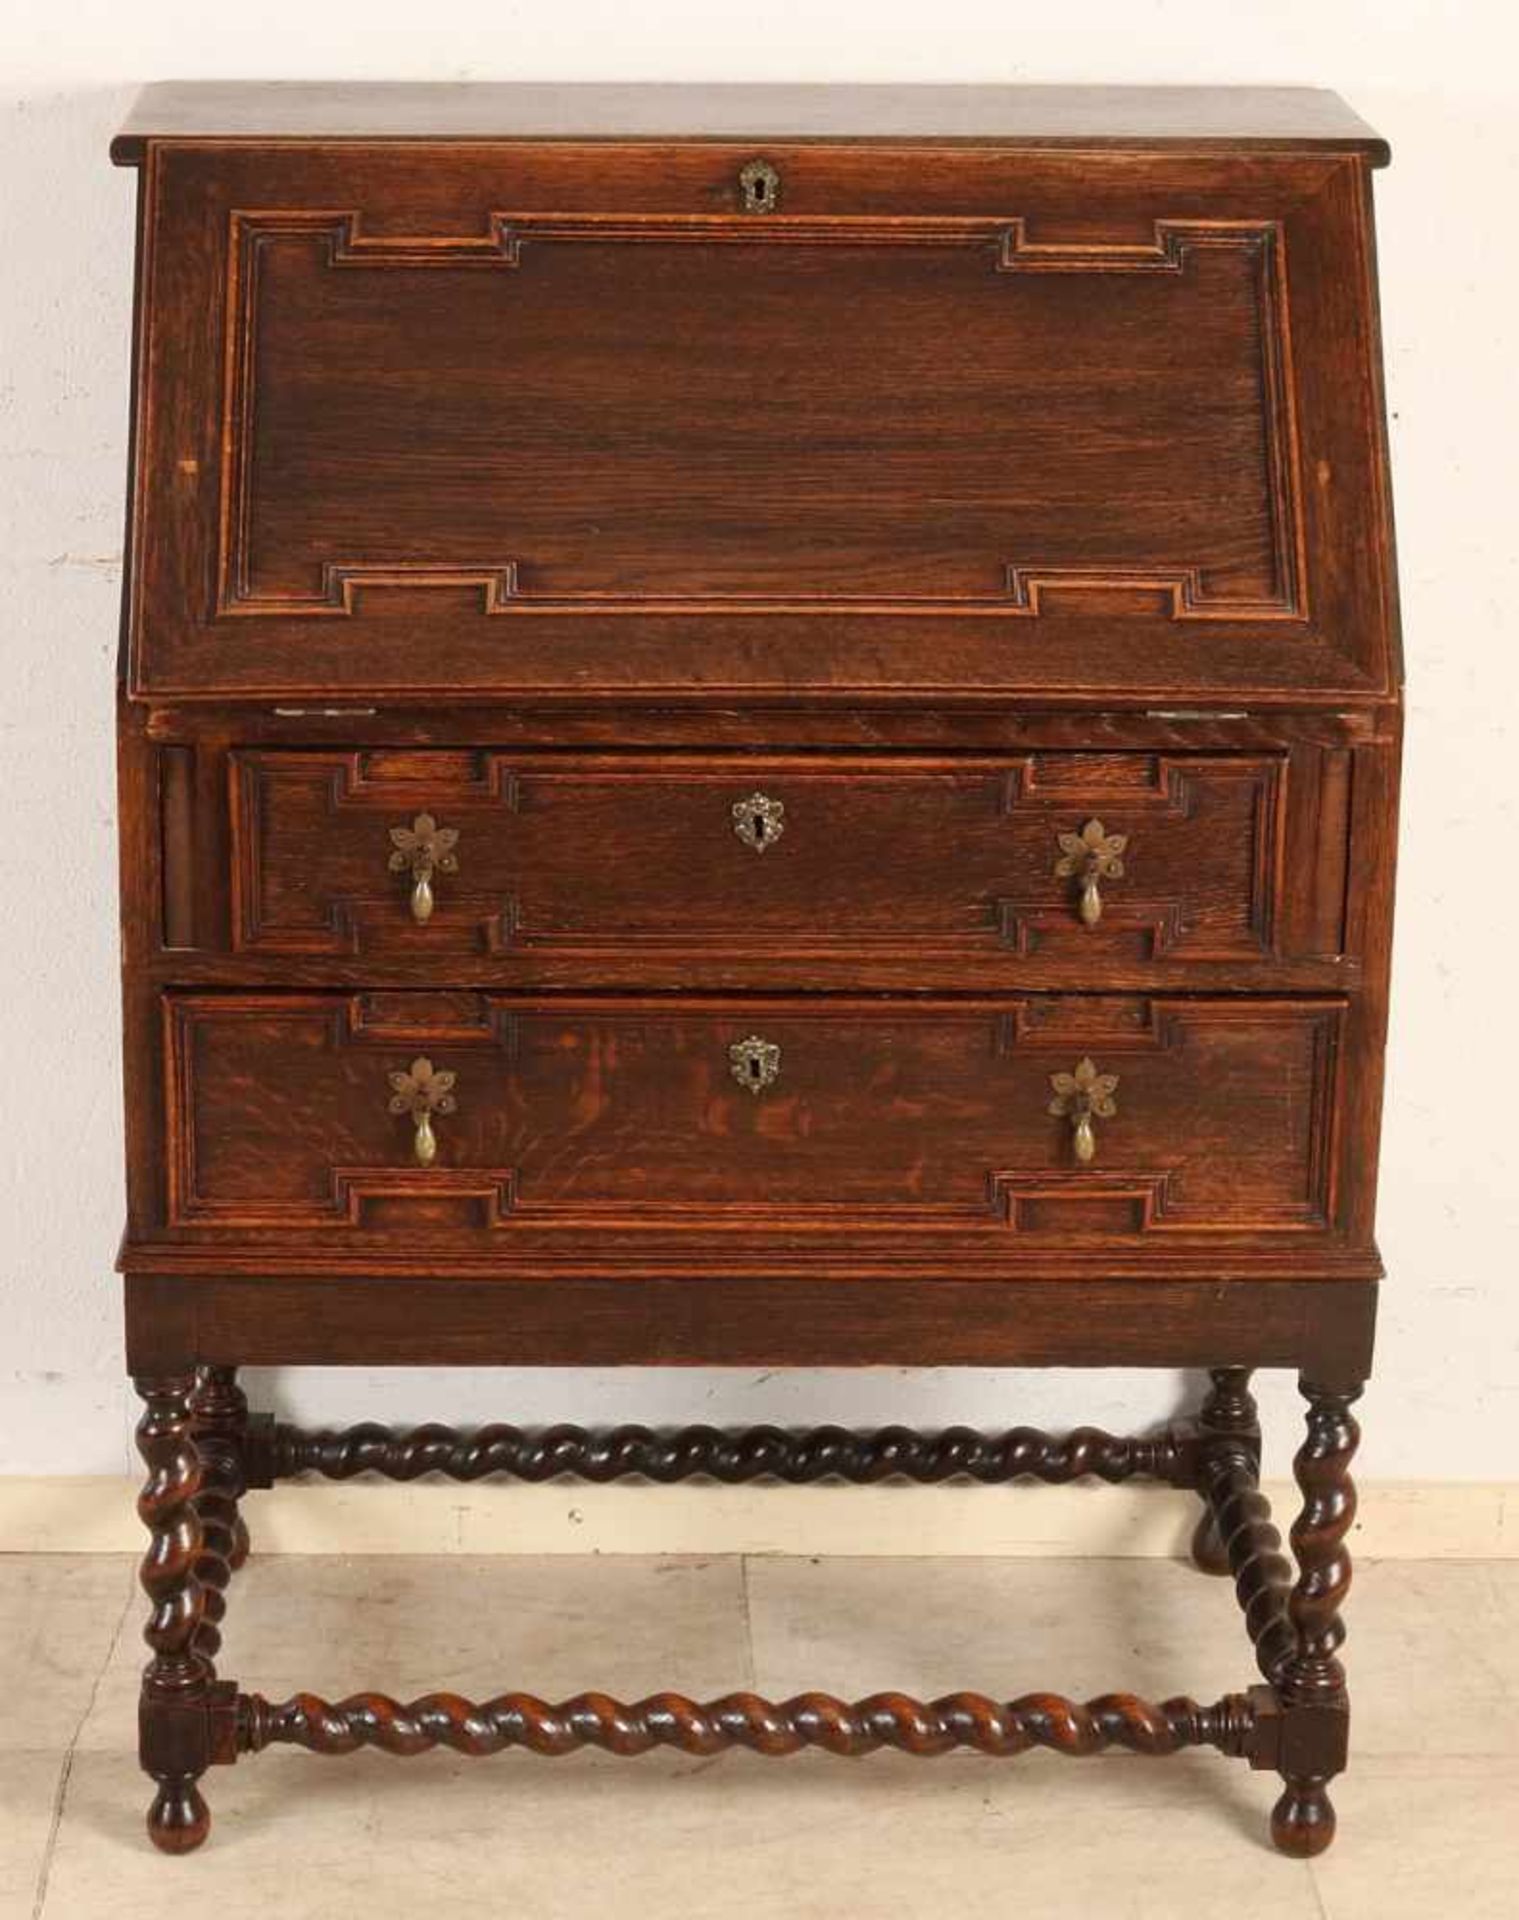 Antique English oak desk with original fittings and twisted legs. Approximately 1920. Size: 106 x 80 - Bild 2 aus 2